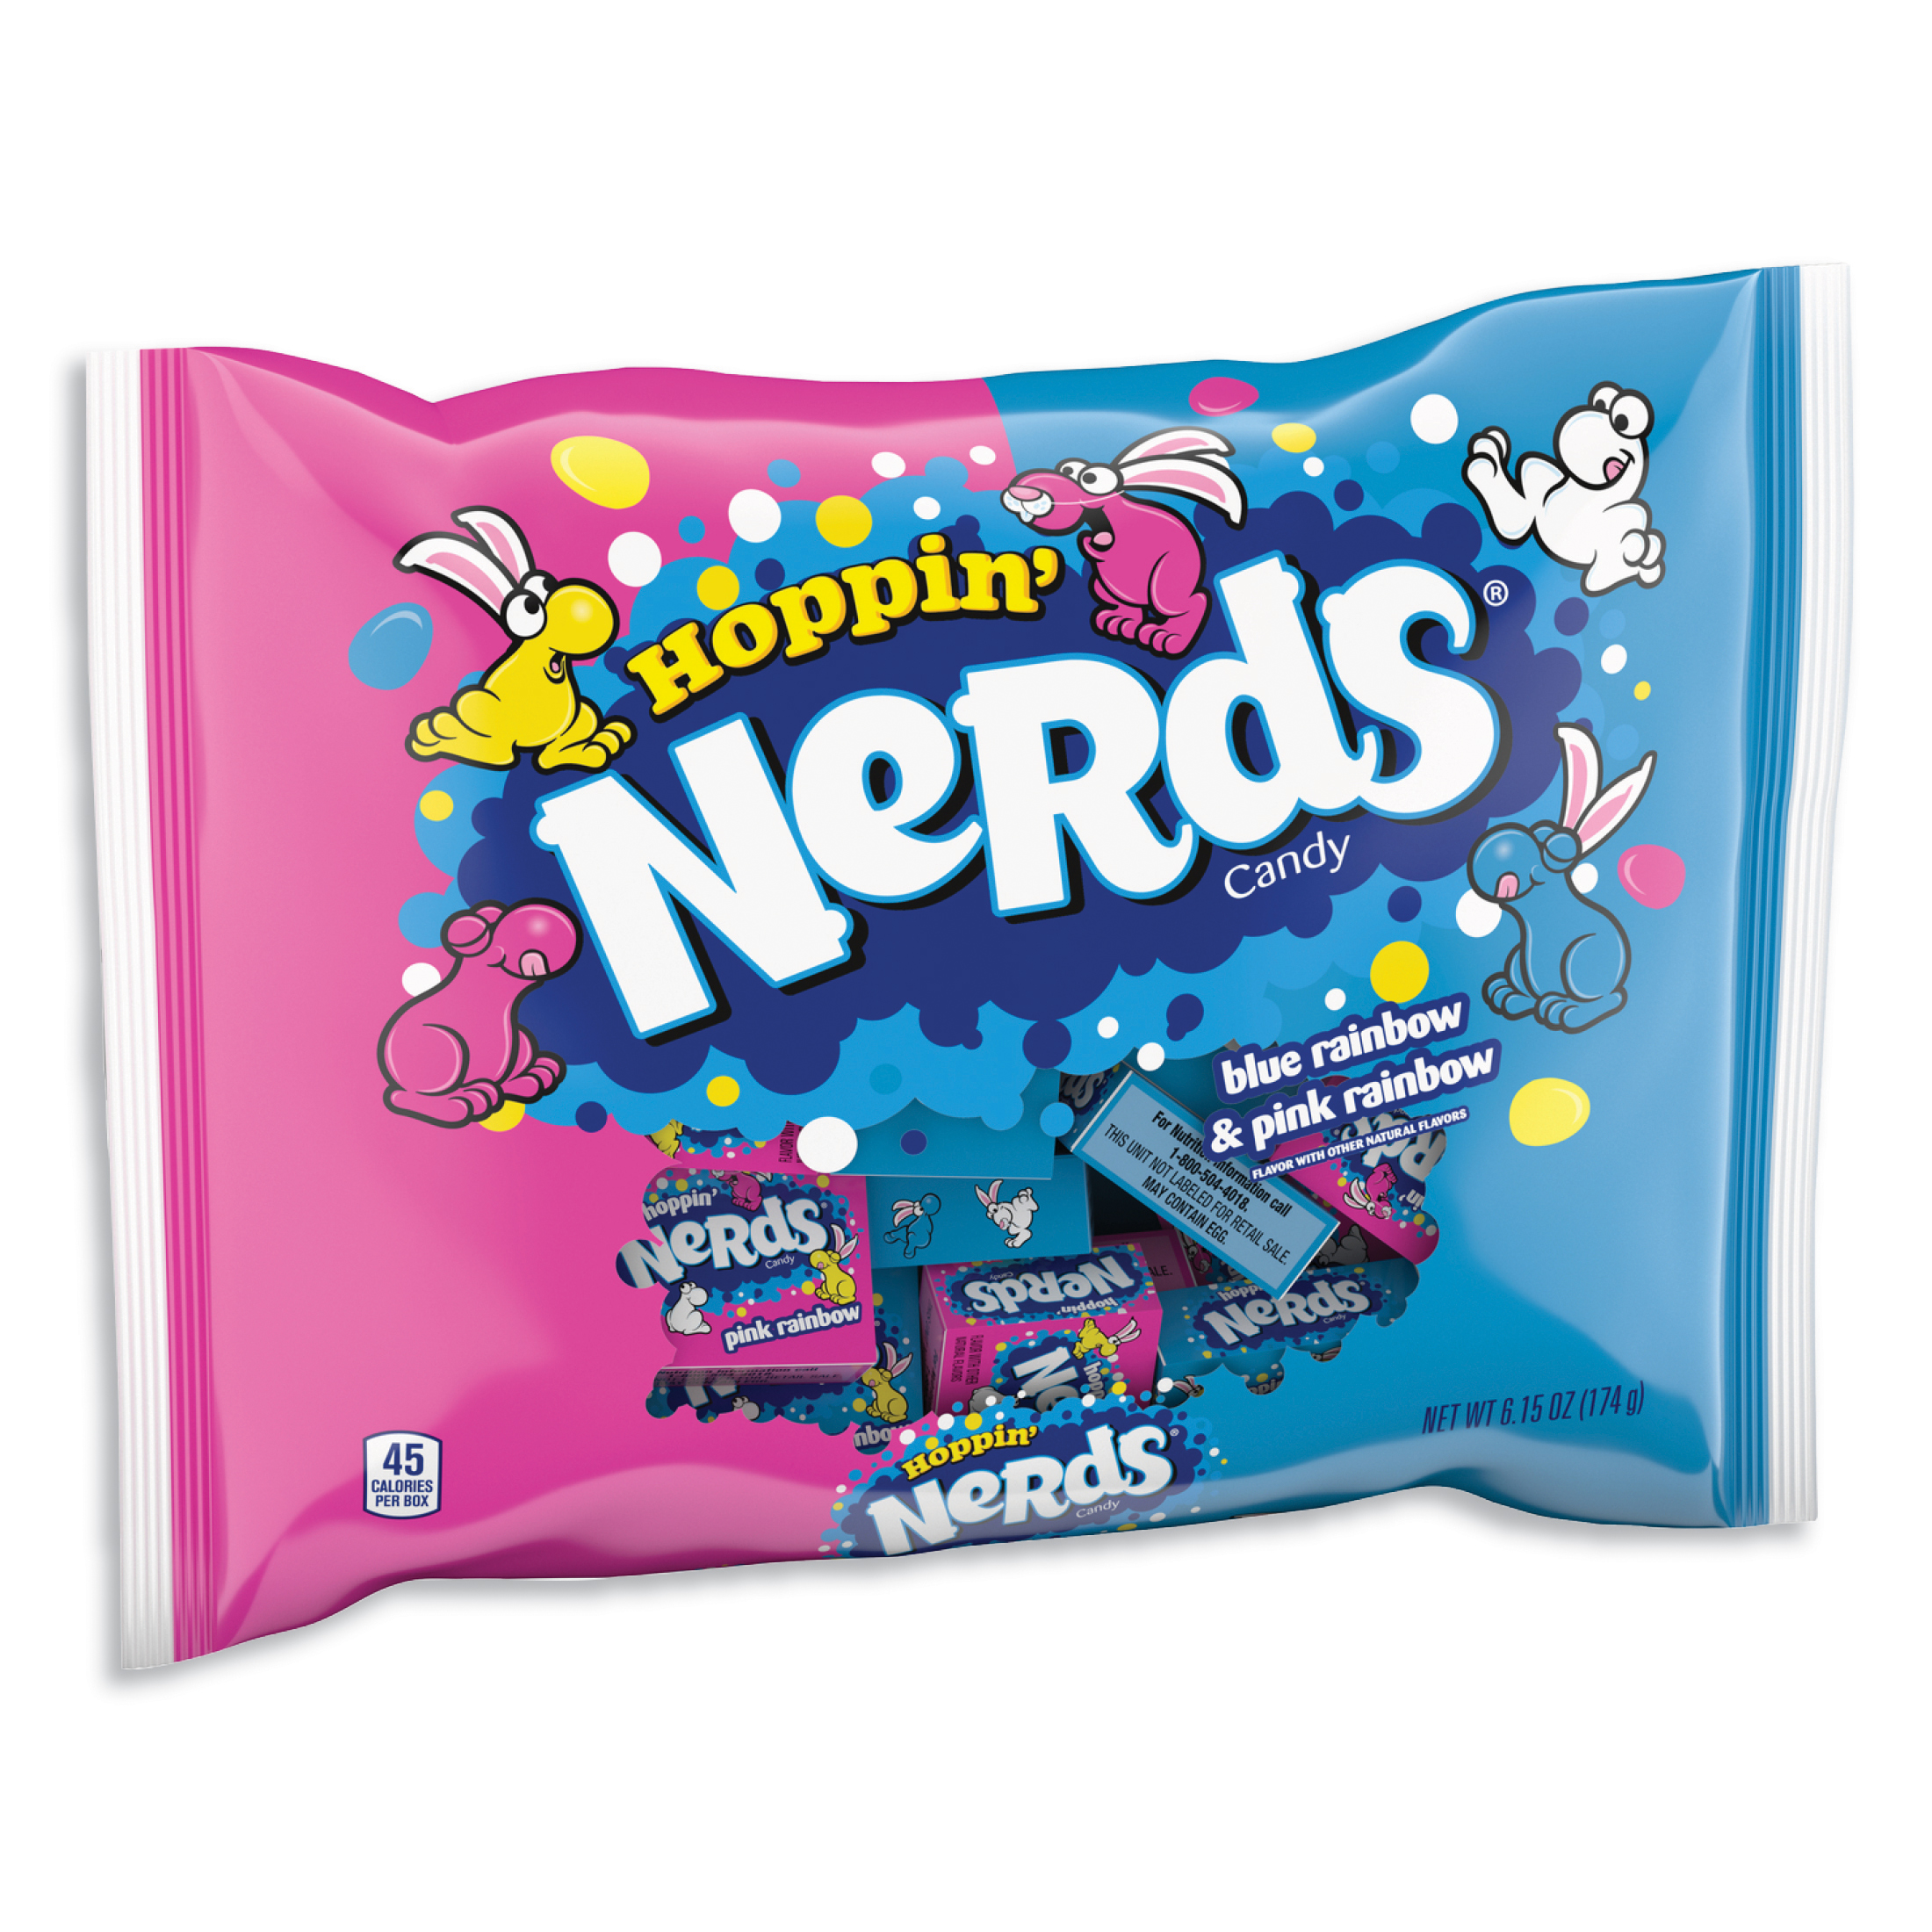 Nerds Rainbow Hoppin' Easter Fruit Flavored Candy Mini Boxes, 6.15 oz - image 1 of 7